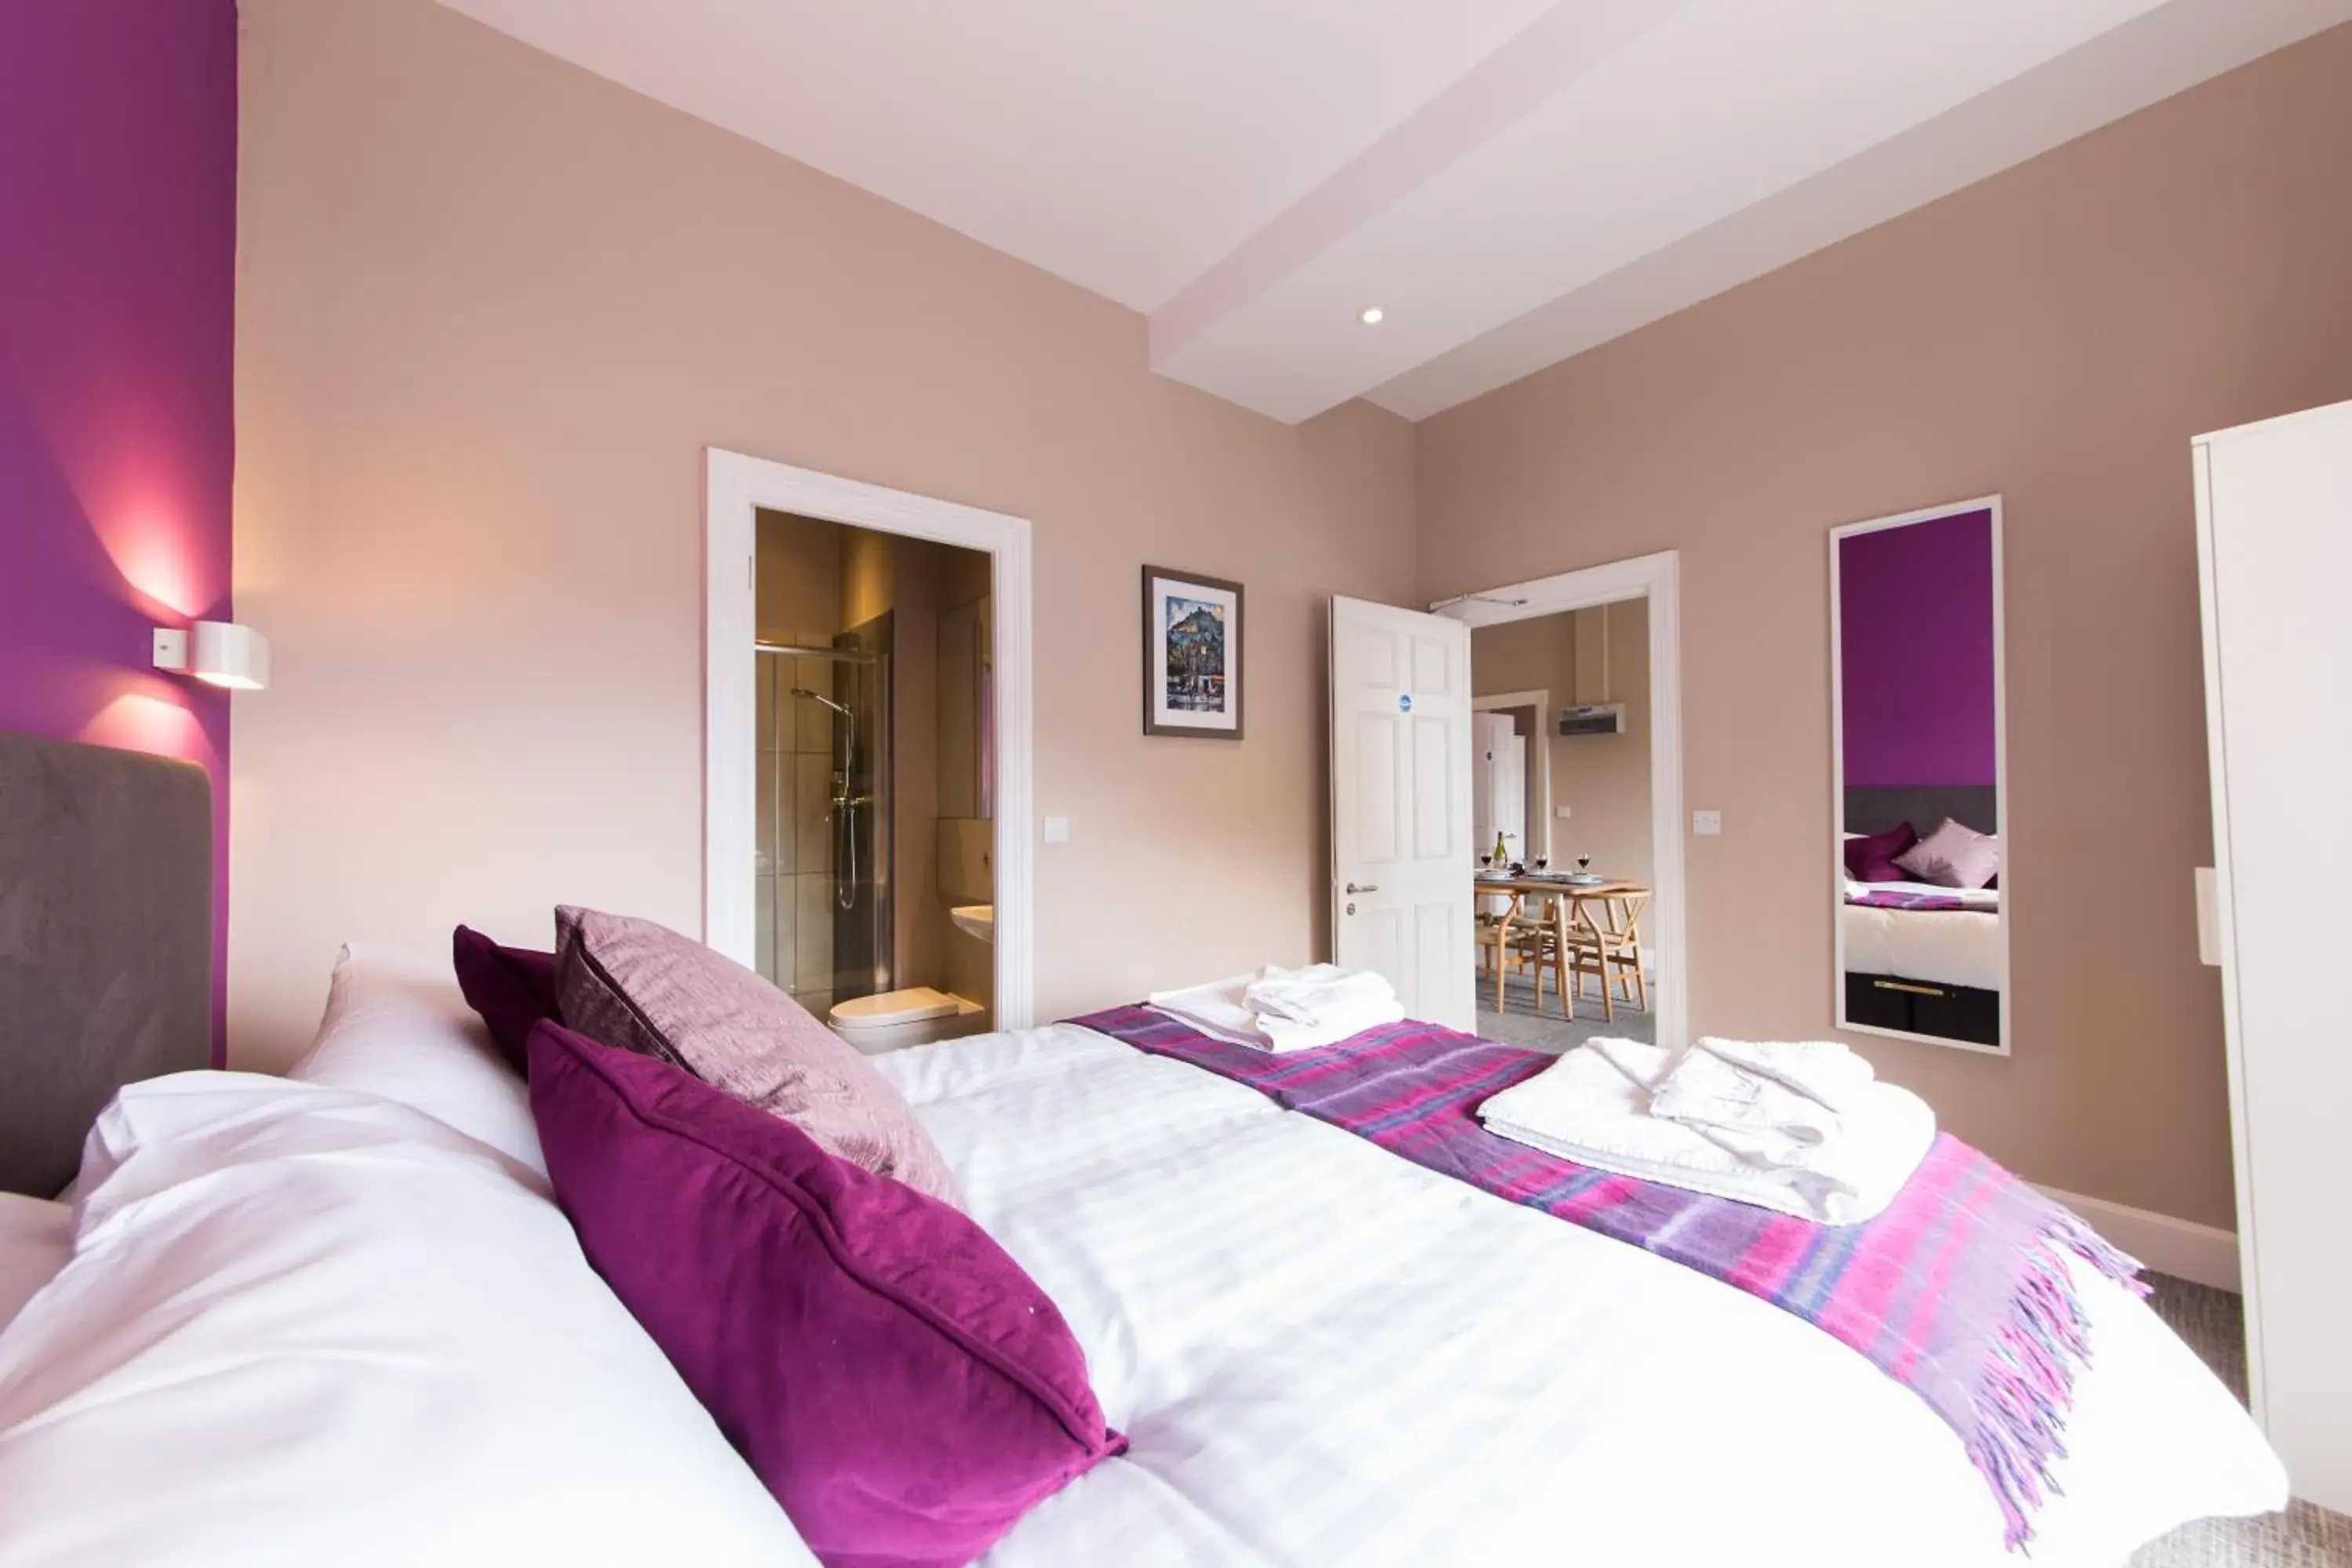 Bed, Room Photo in The Spires Serviced Apartments Edinburgh